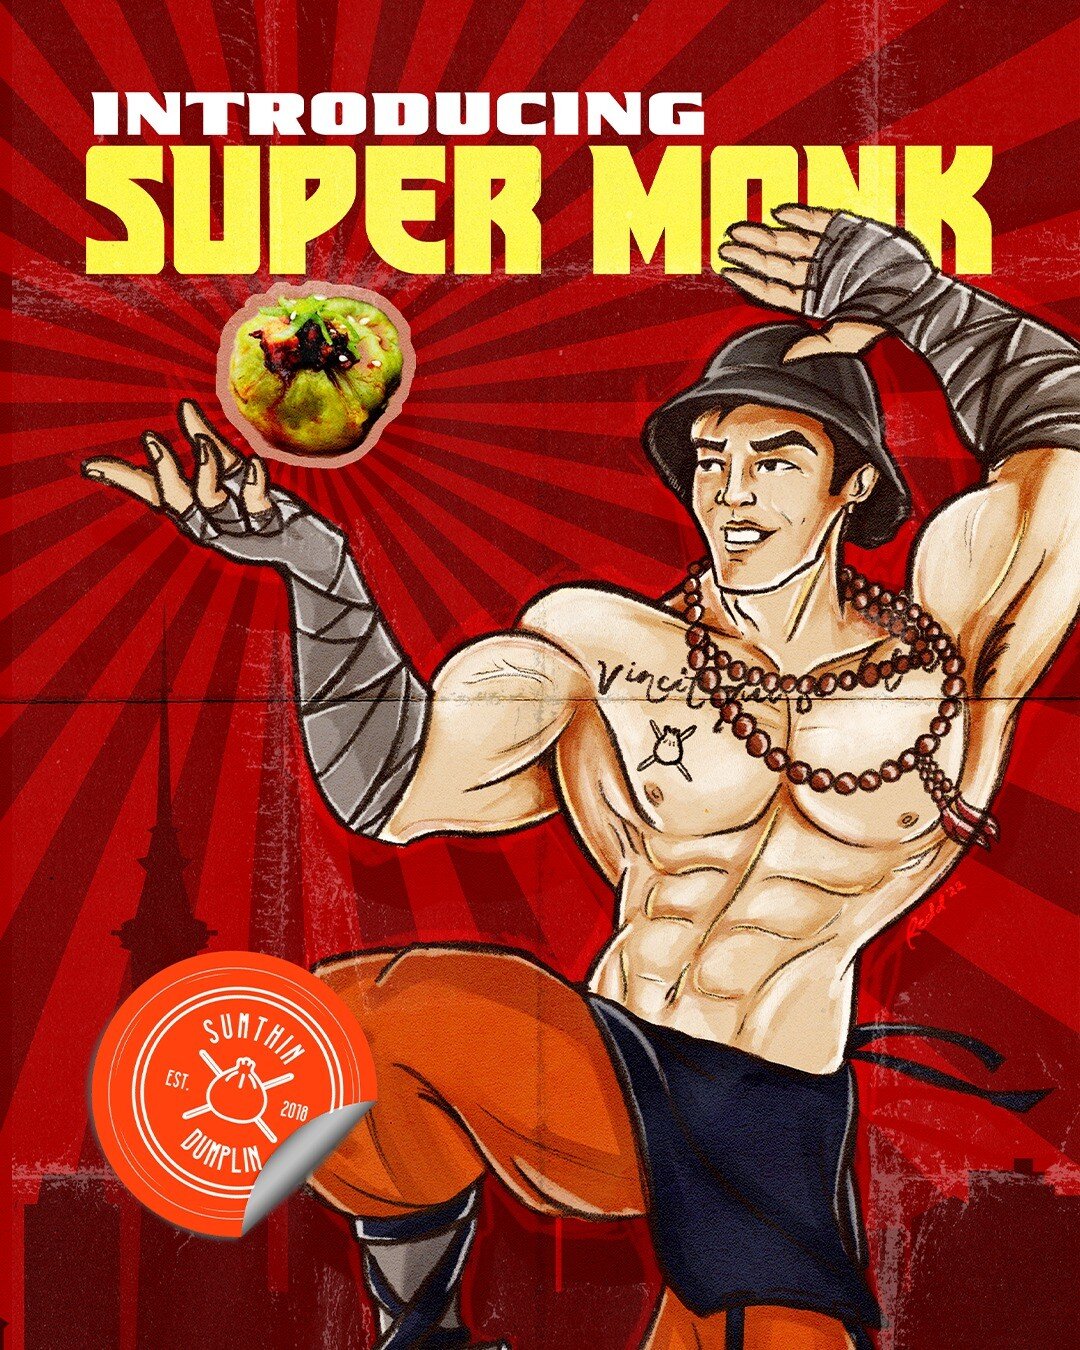 Breaking my accidental IG Posting hiaturs to post this artwork! Honoured to be able to collaborate with @sumthindumplin and @thegreatnihs on creating a cool artwork to promote their new limited edition dumpling &quot;Super Monk&quot; This was the ver